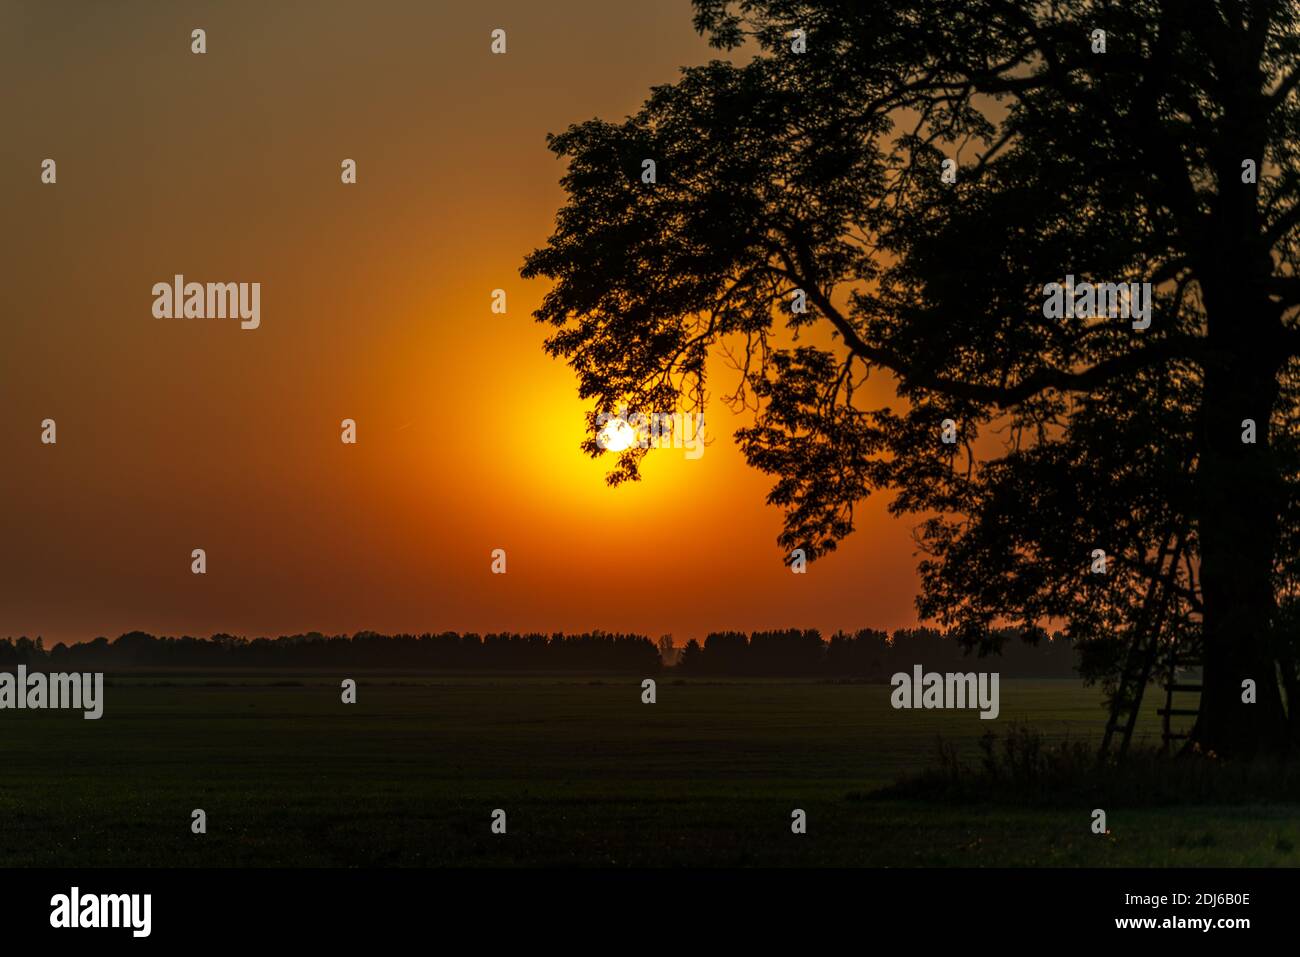 chubby tree silhouette at summer sunset because the sun is hidden behind tree branches Stock Photo